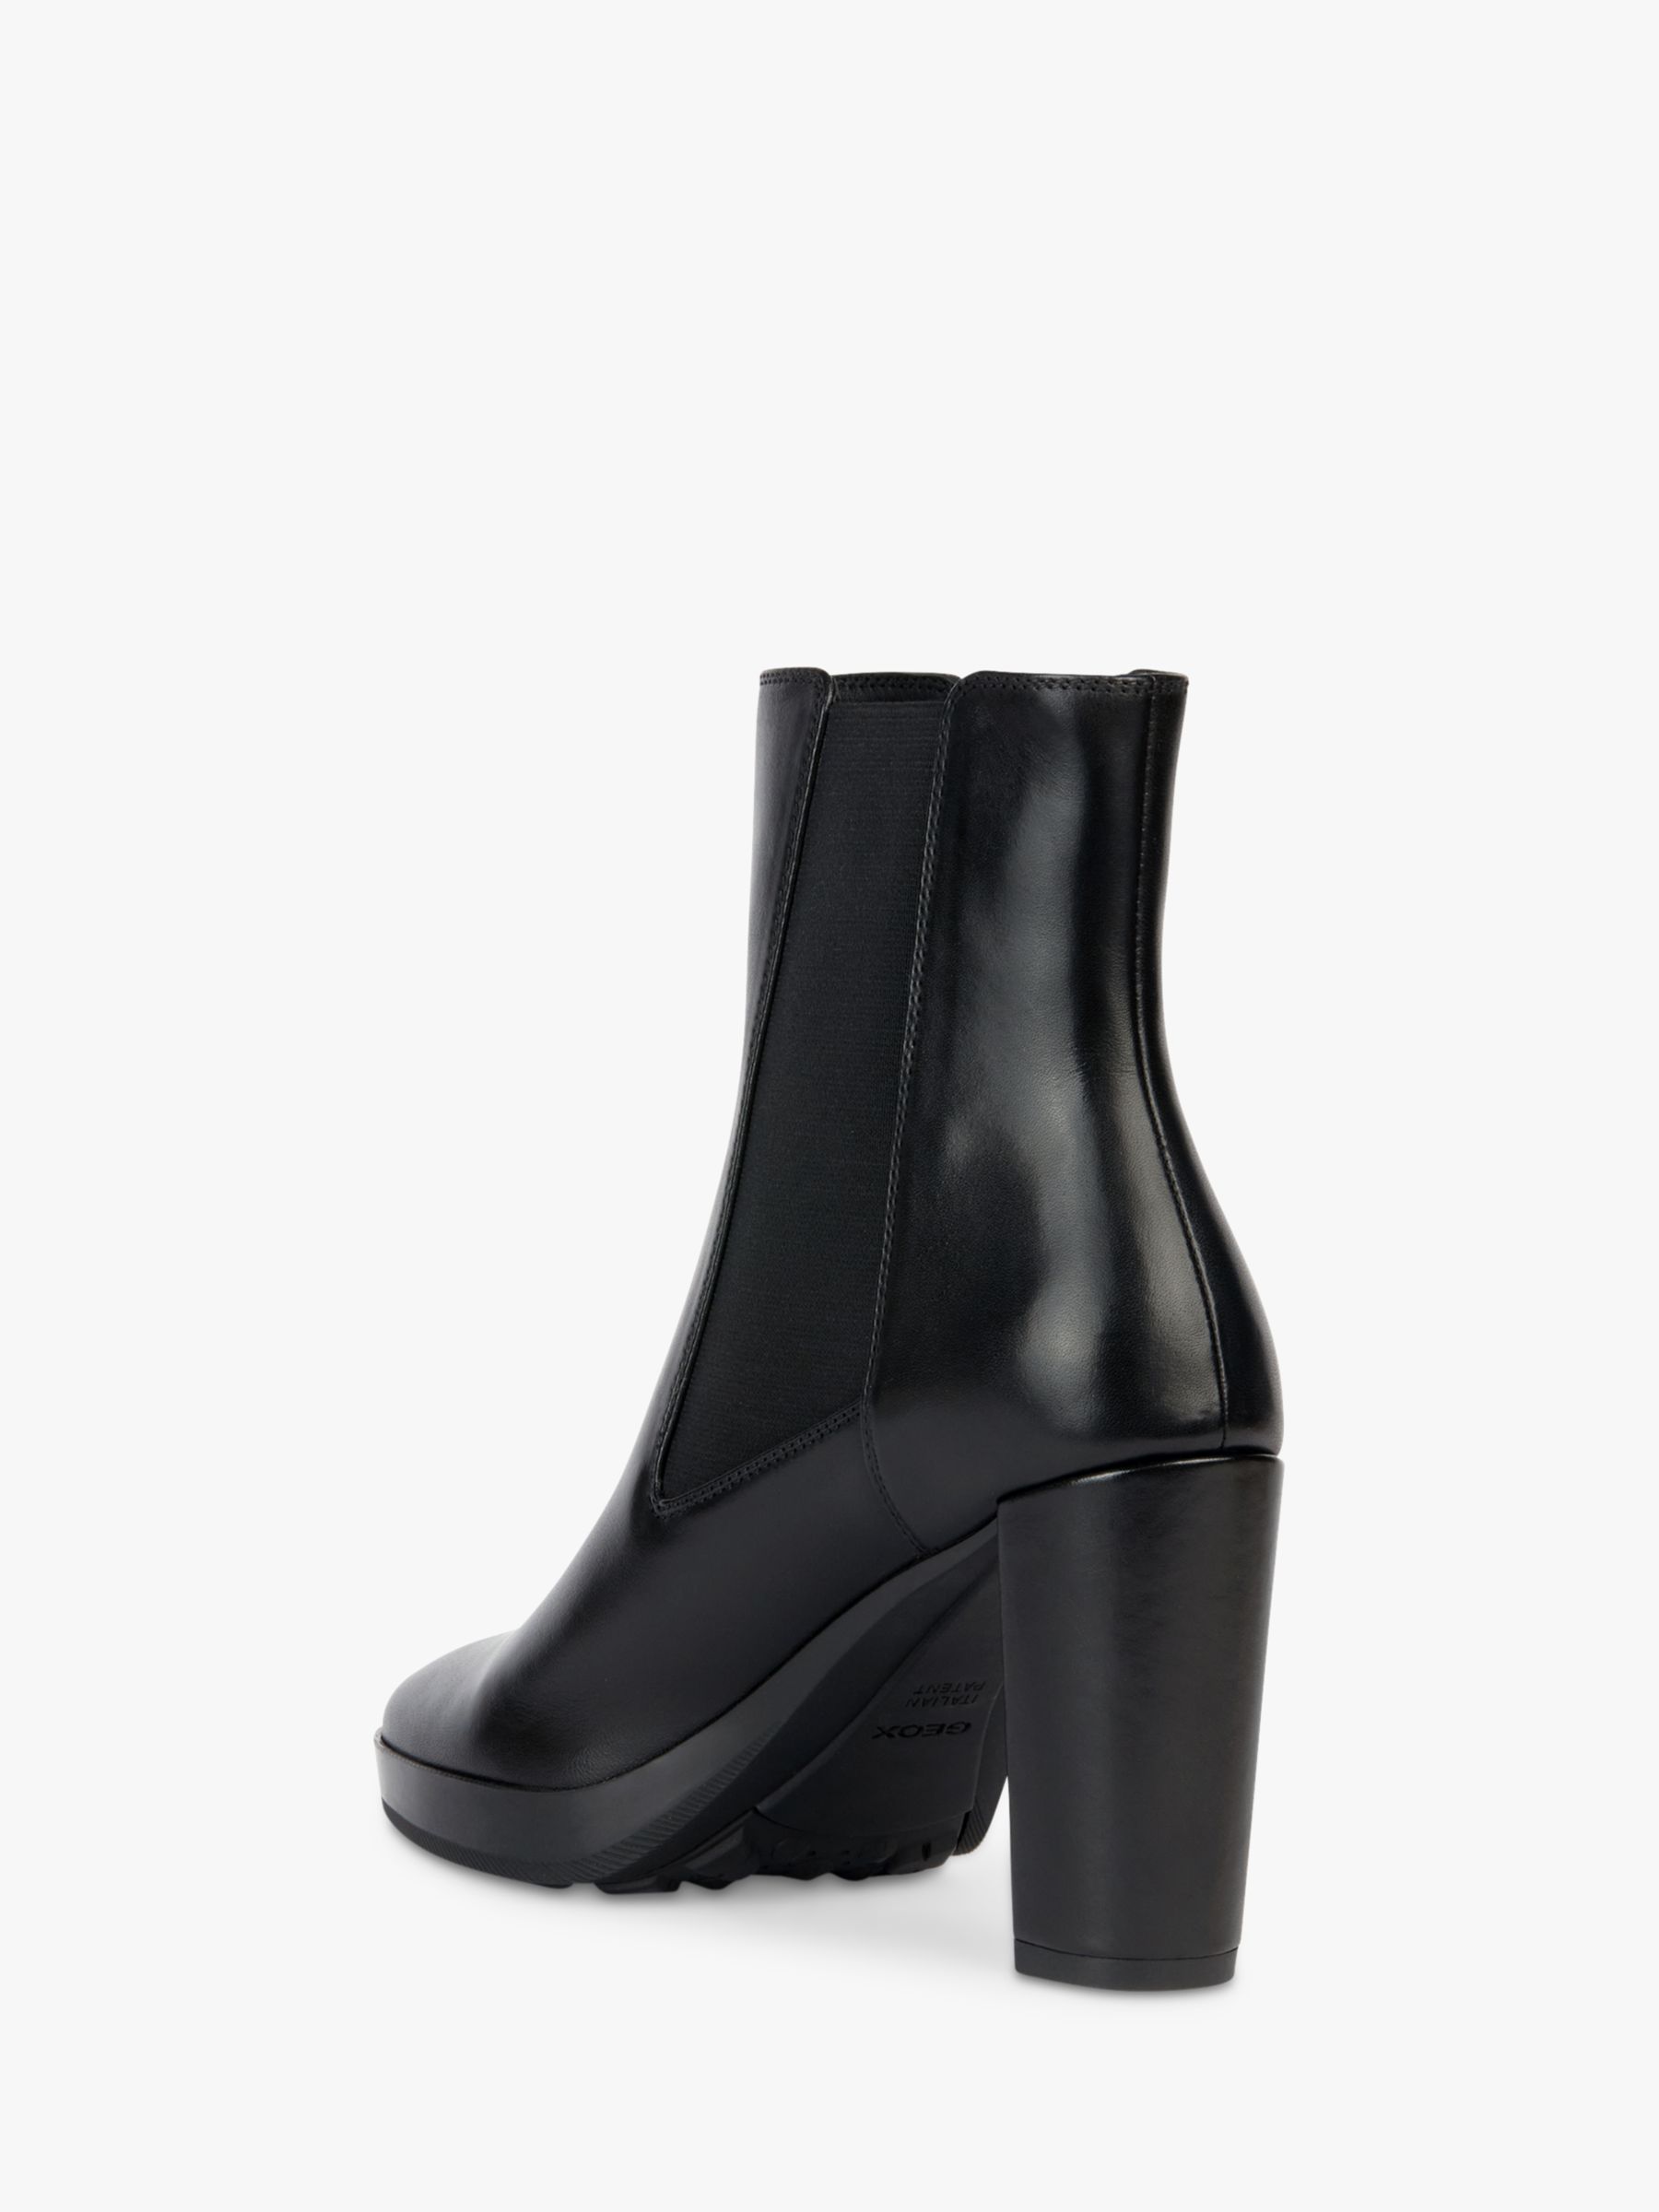 Geox Walk Pleasure 85 Wide Fit Leather Ankle Boots, Black at John Lewis ...